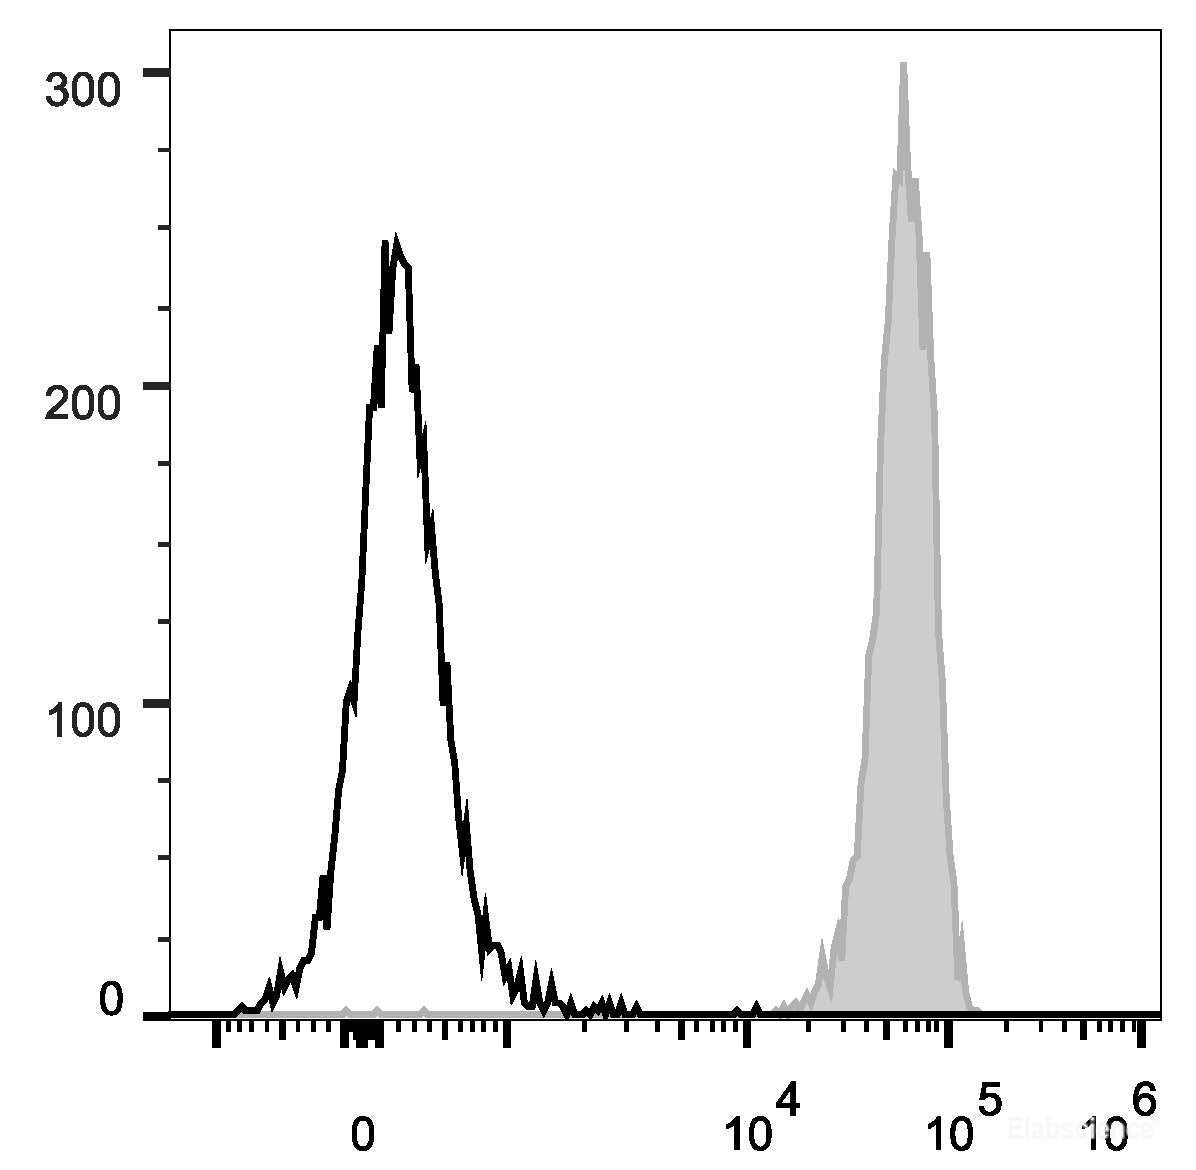 C57BL/6 murine splenocytes are stained with PerCP/Cyanine5.5 Anti-Mouse CD45 Antibody (filled gray histogram). Unstained splenocytes (empty black histogram) are used as control.